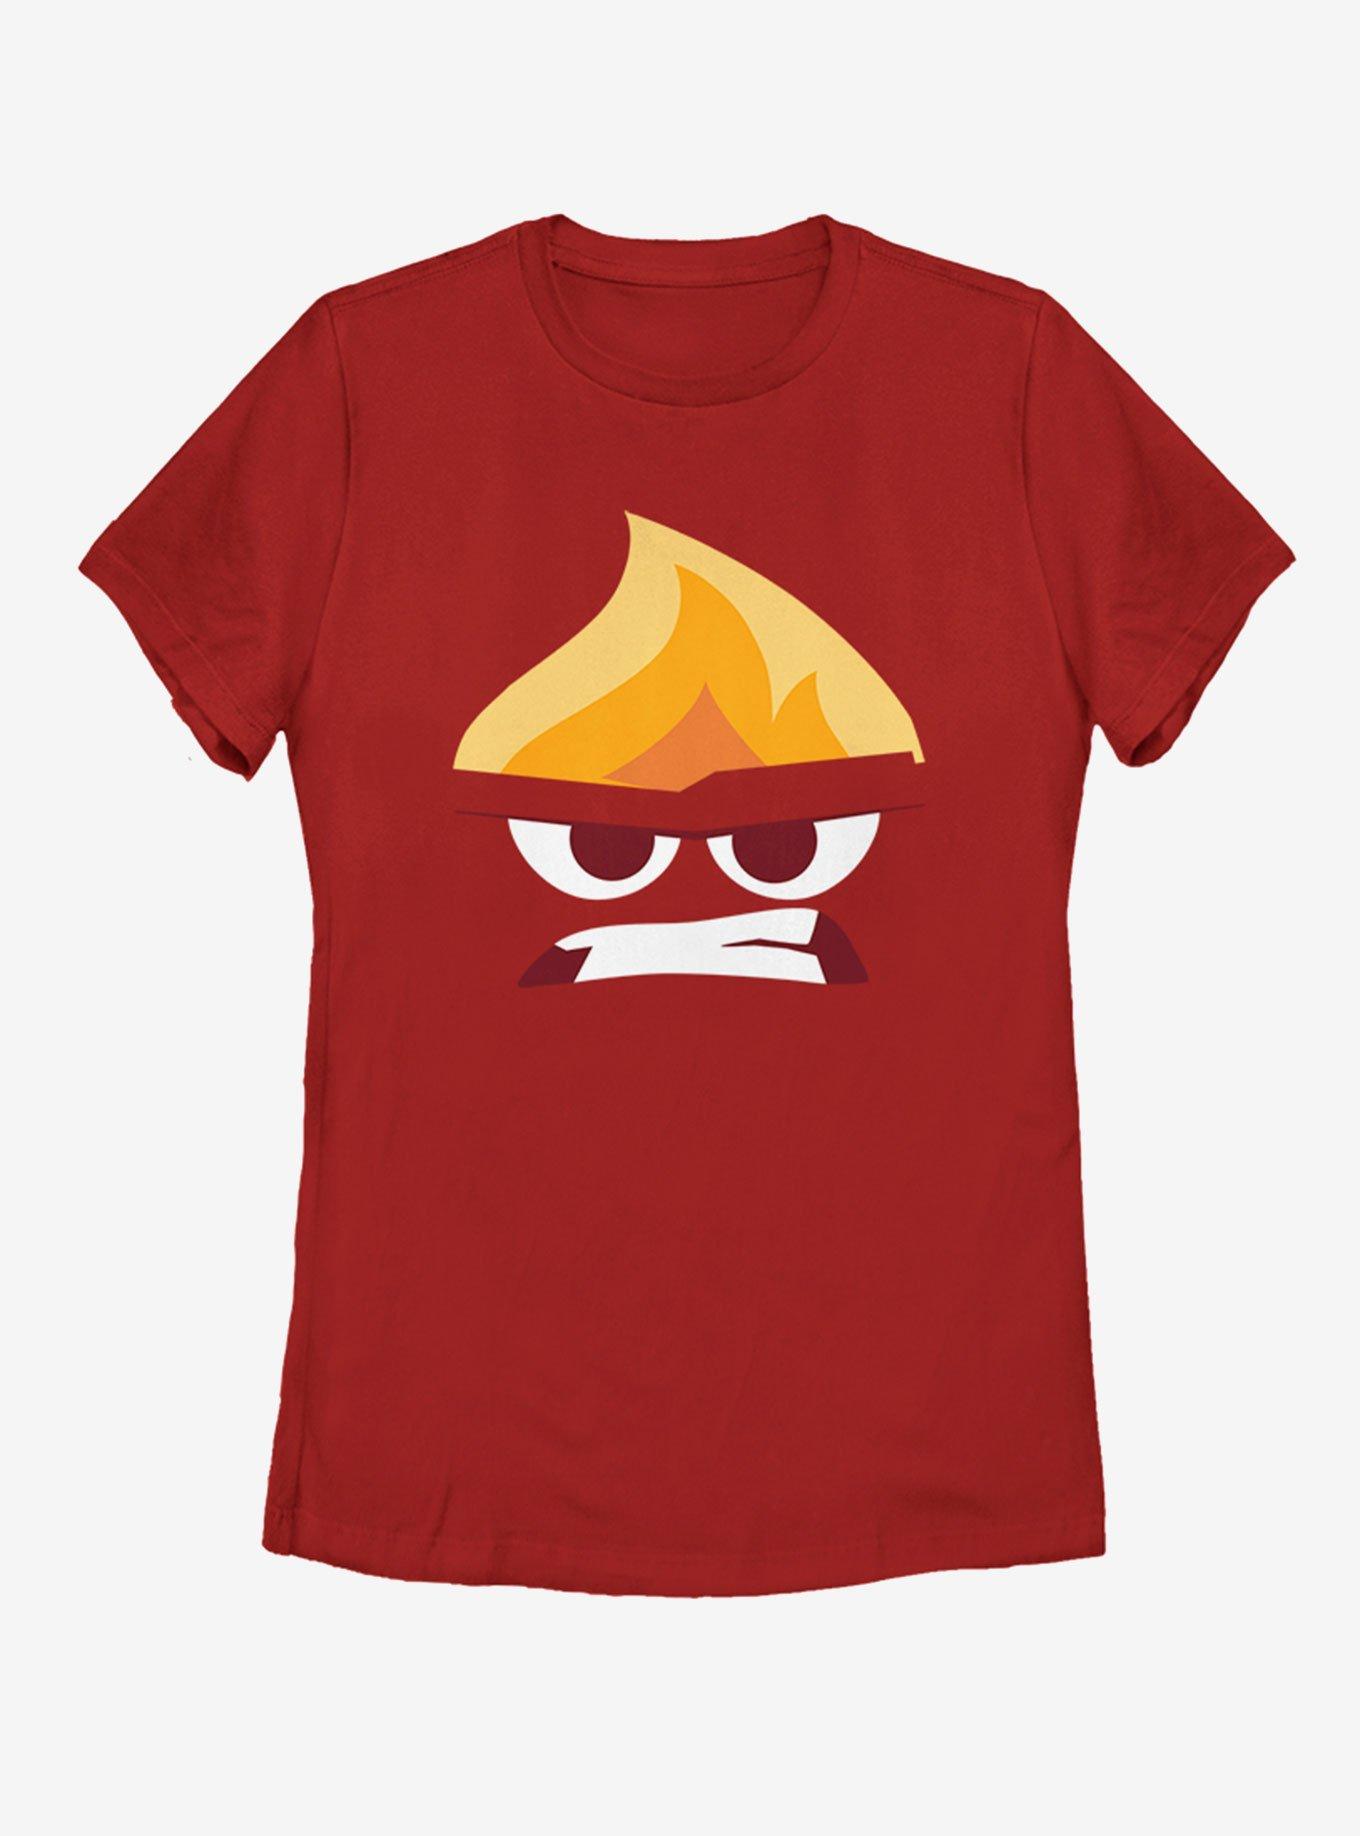 Disney Pixar Inside Out Angry Face Womens T-Shirt, RED, hi-res